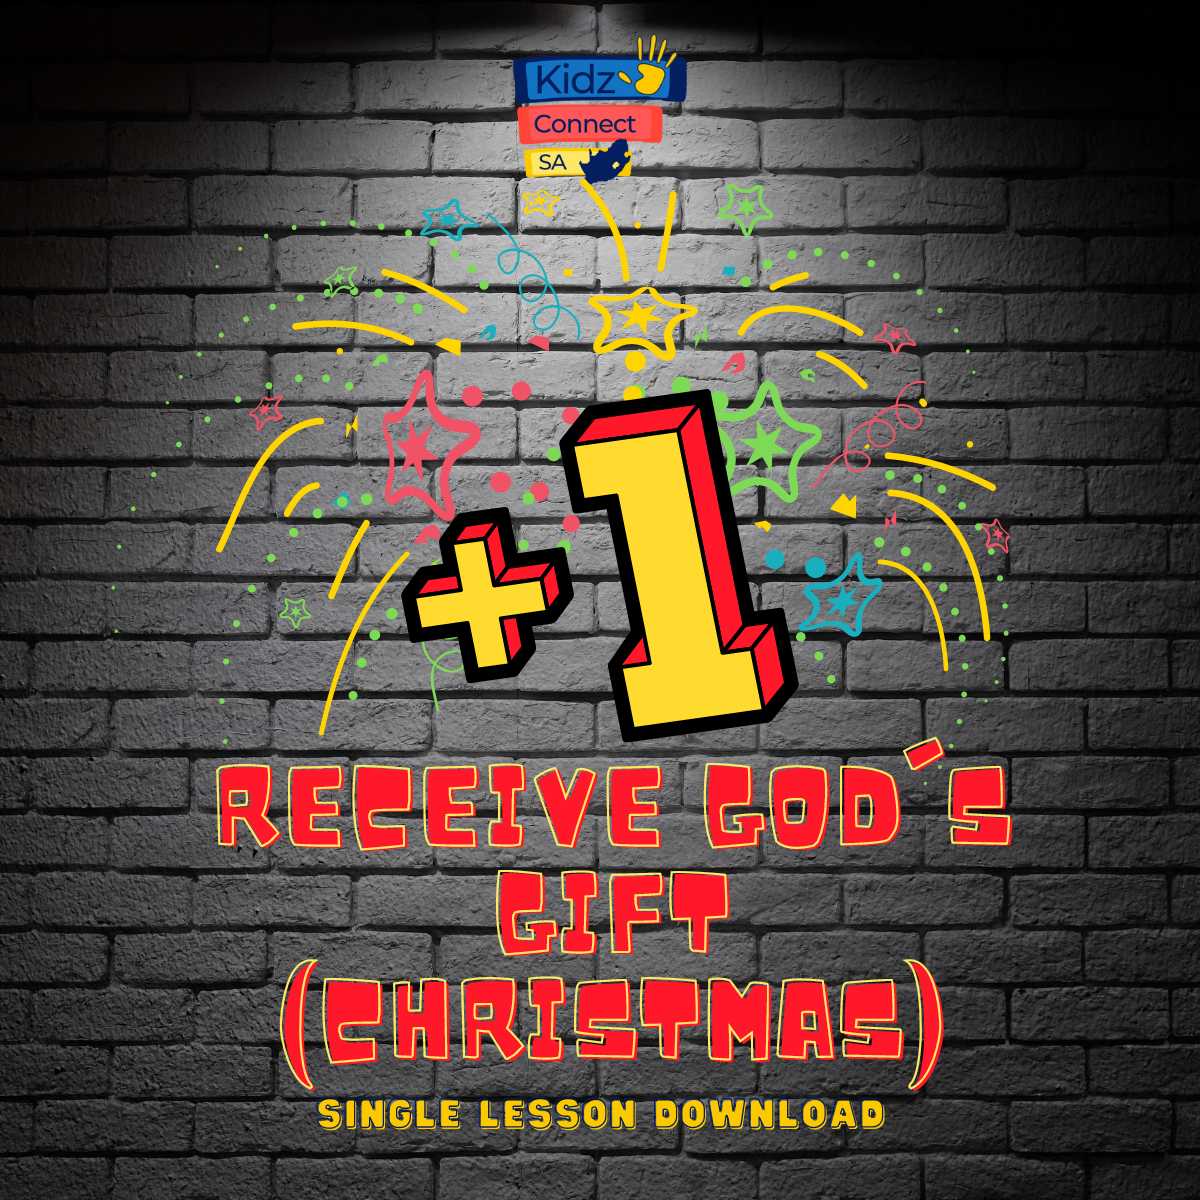 Receive God's gift of Salvation (Christmas) - Single Lesson